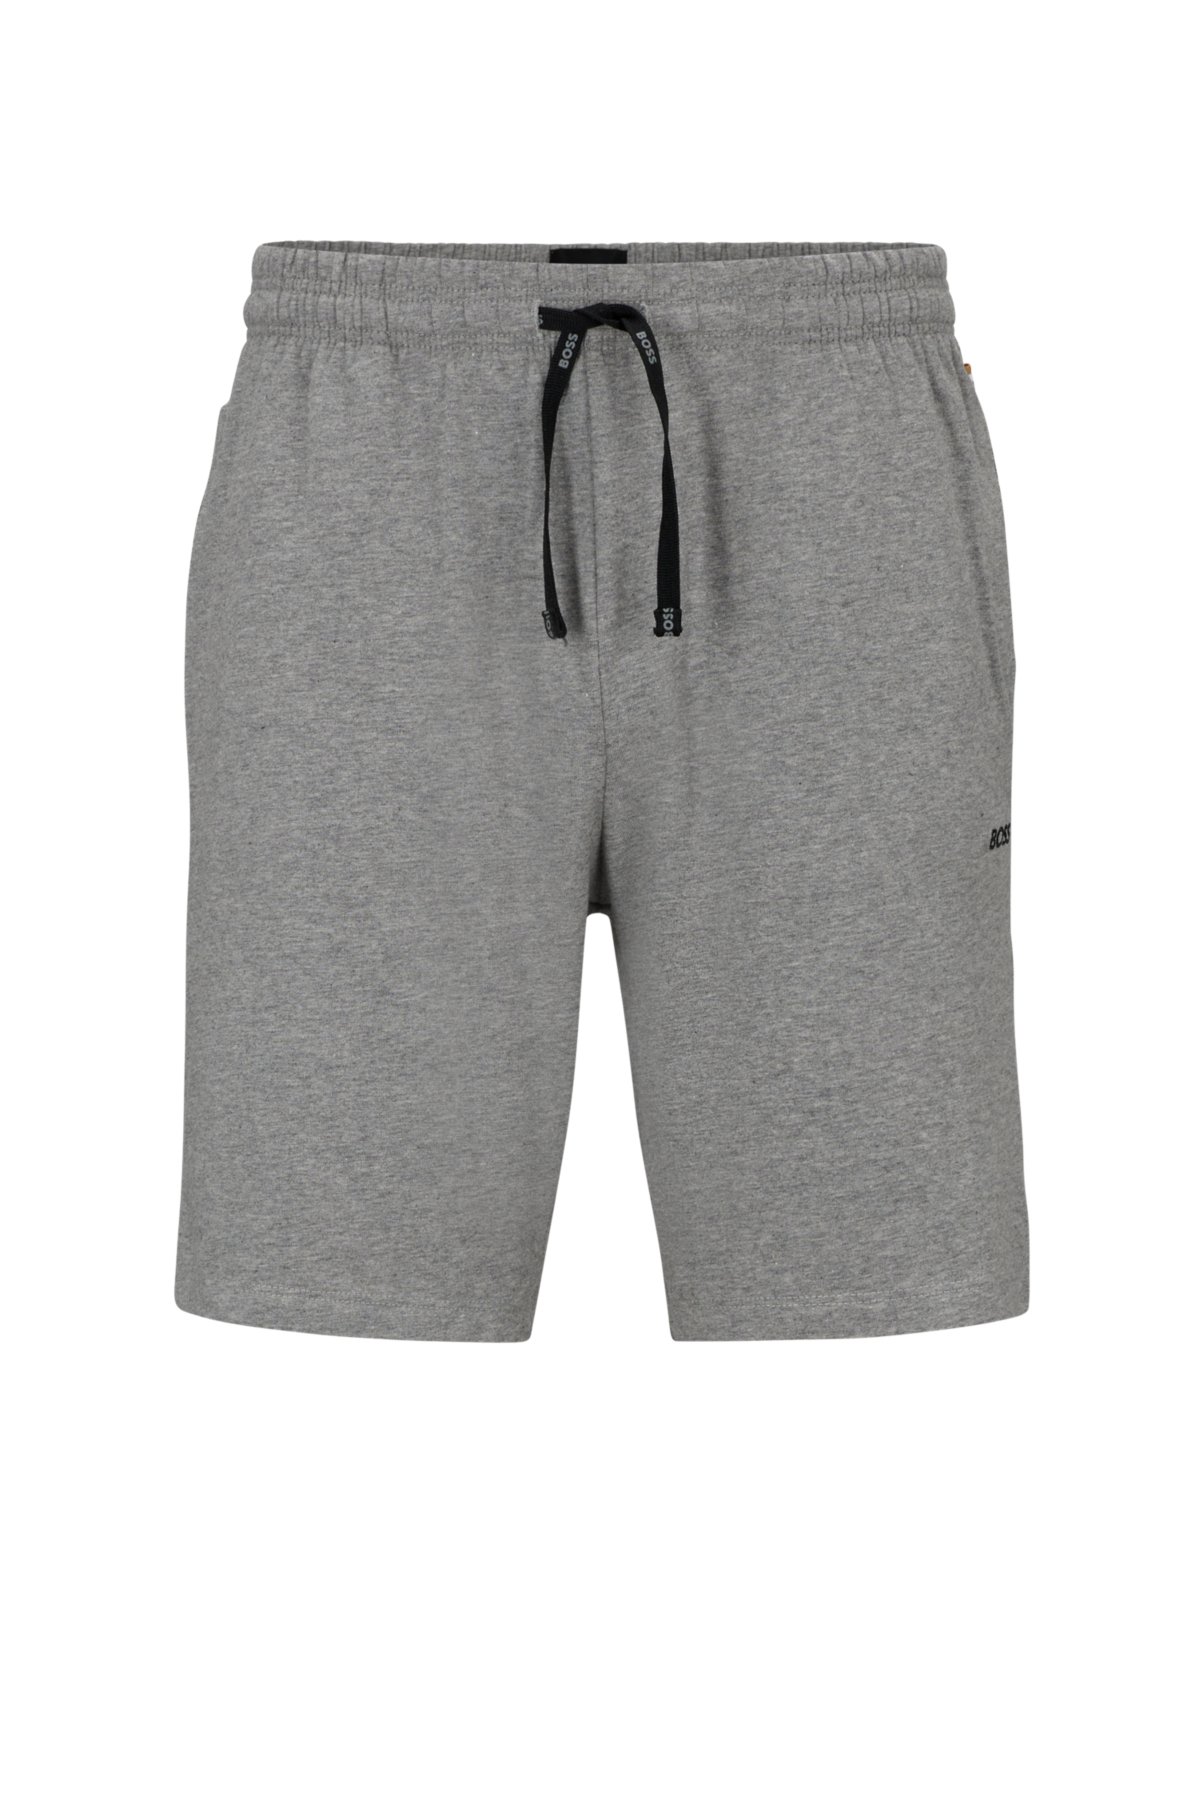 BOSS - Stretch-cotton shorts with contrast logo and drawcord